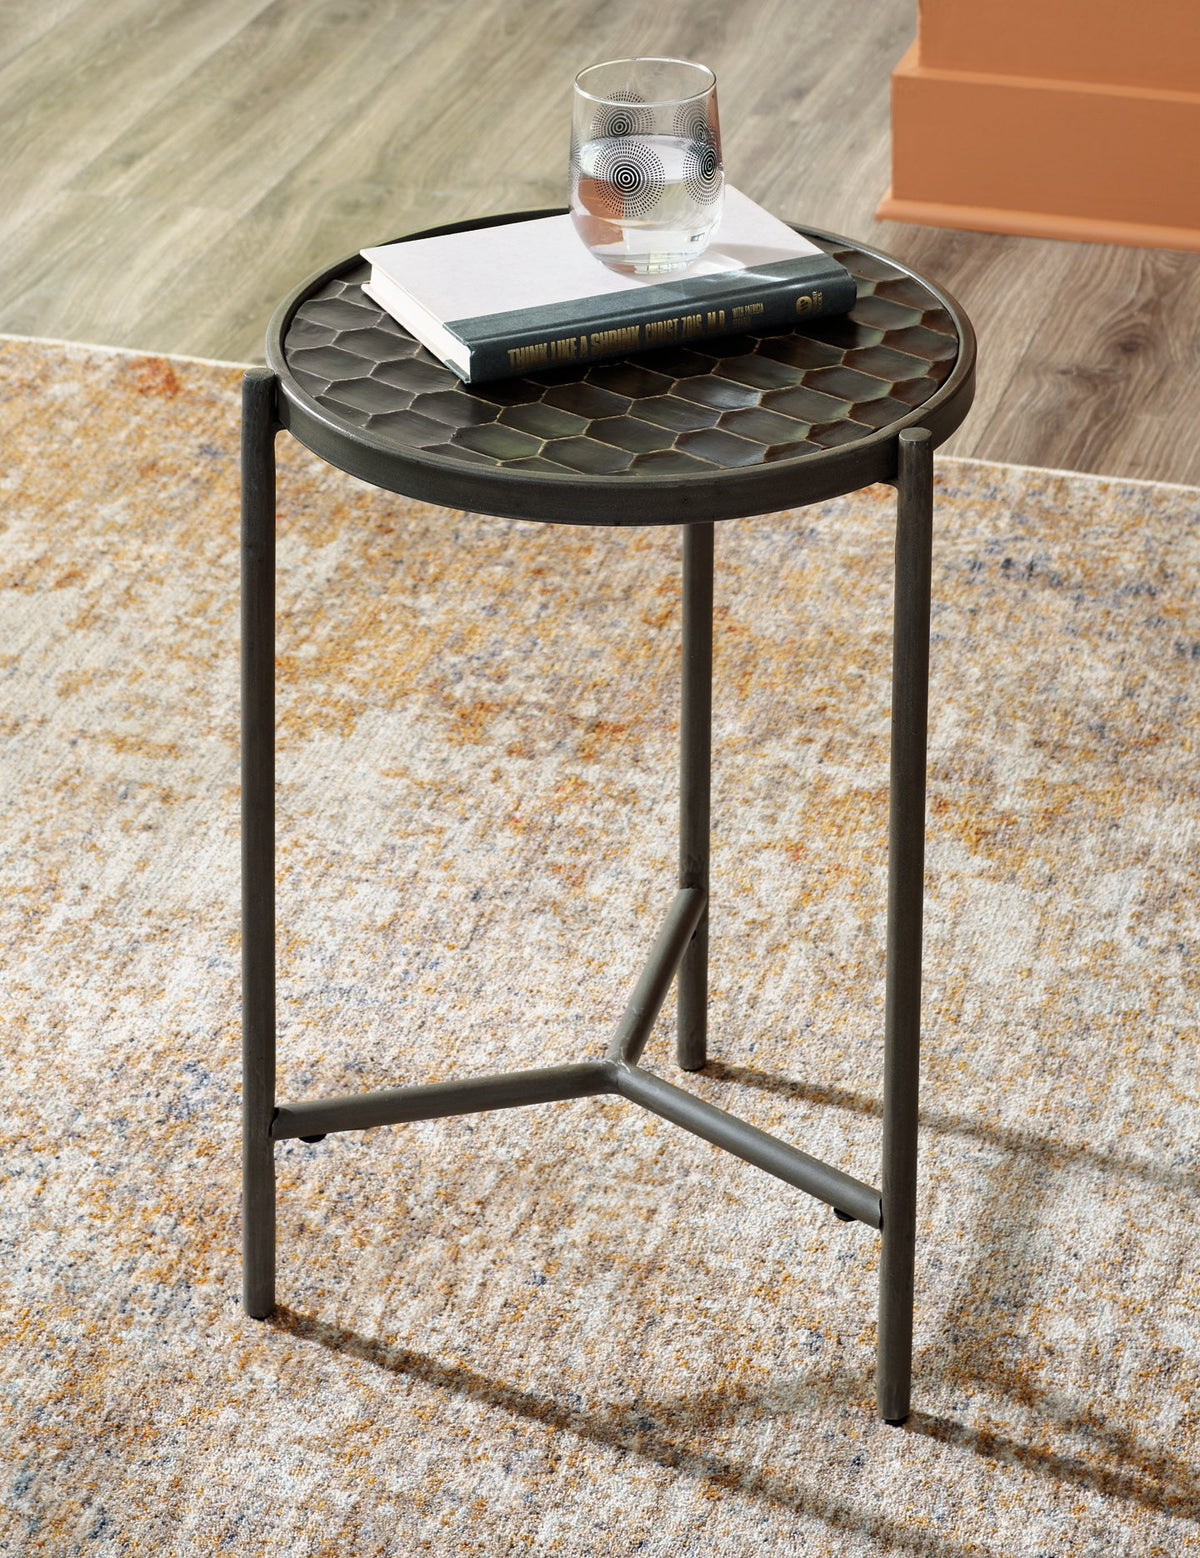 Doraley Chairside End Table  Half Price Furniture